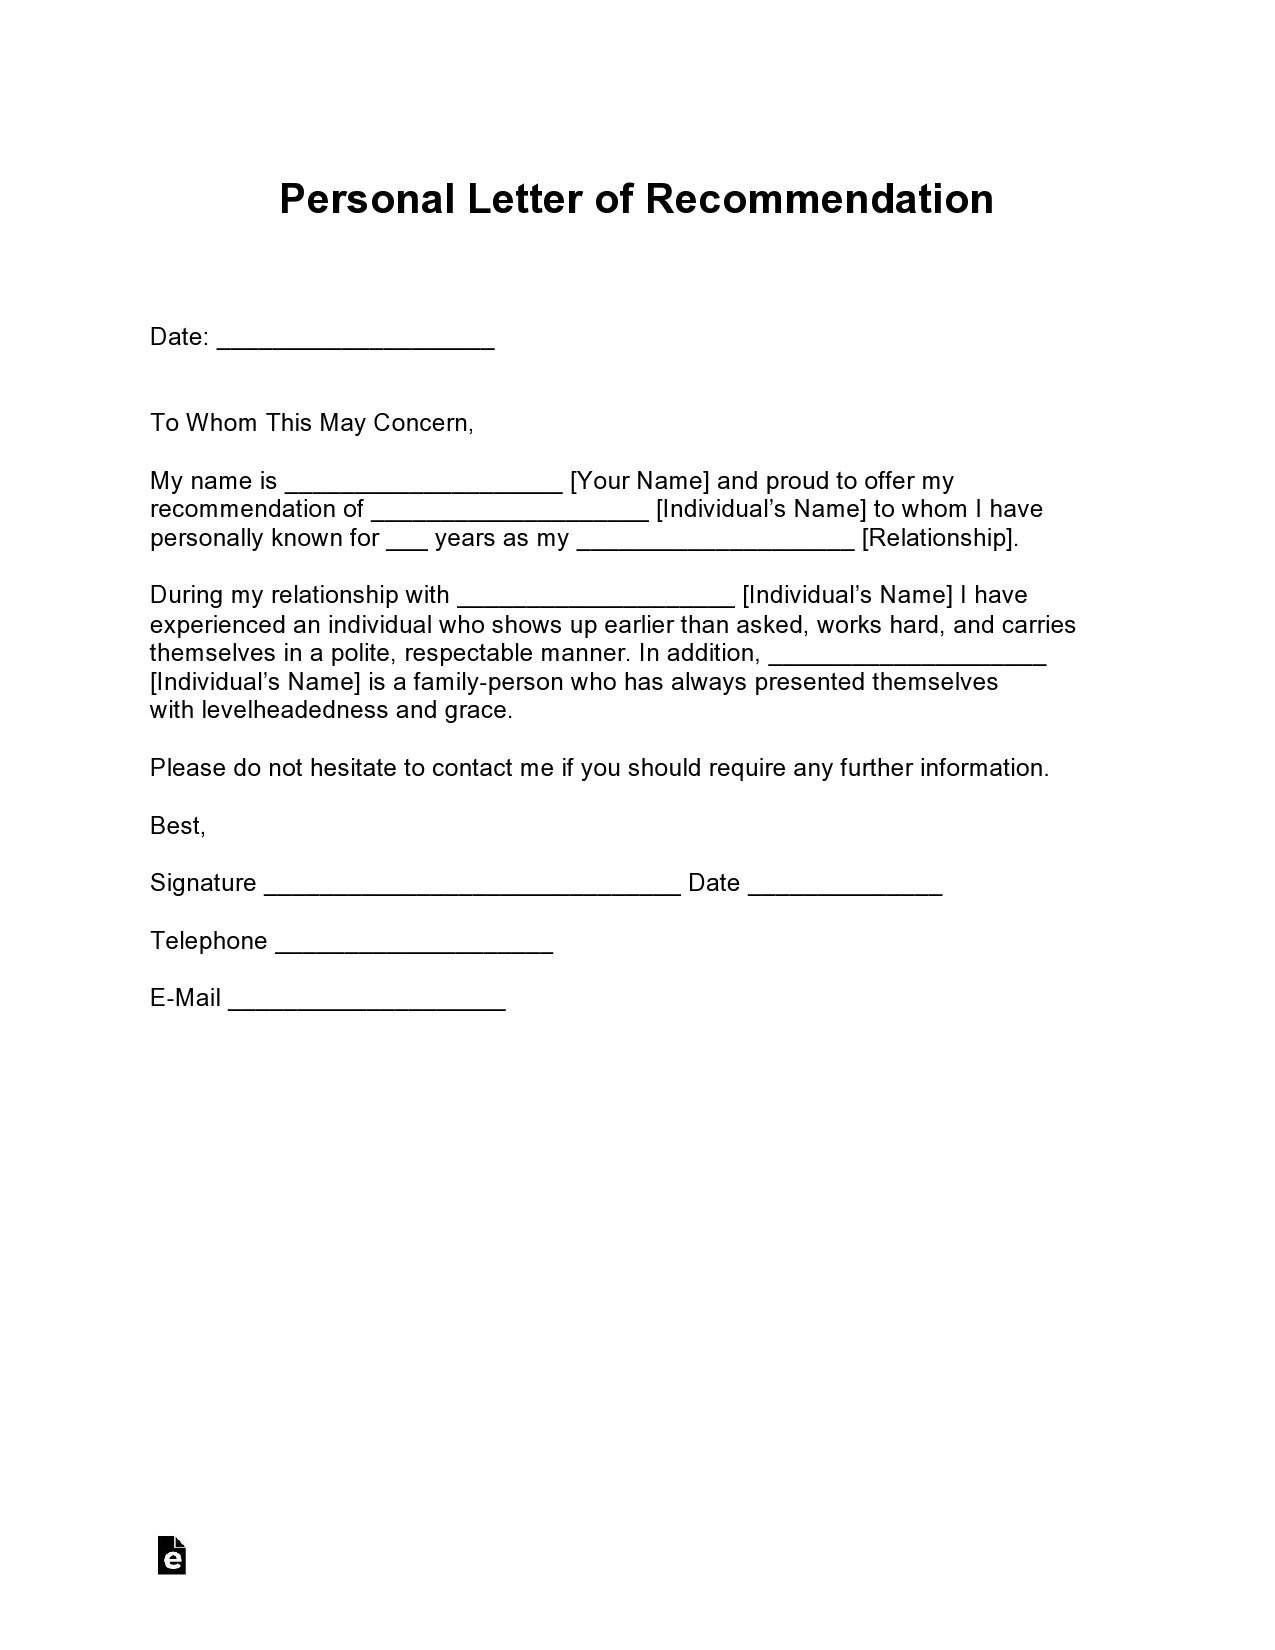 Free personal letter format 21